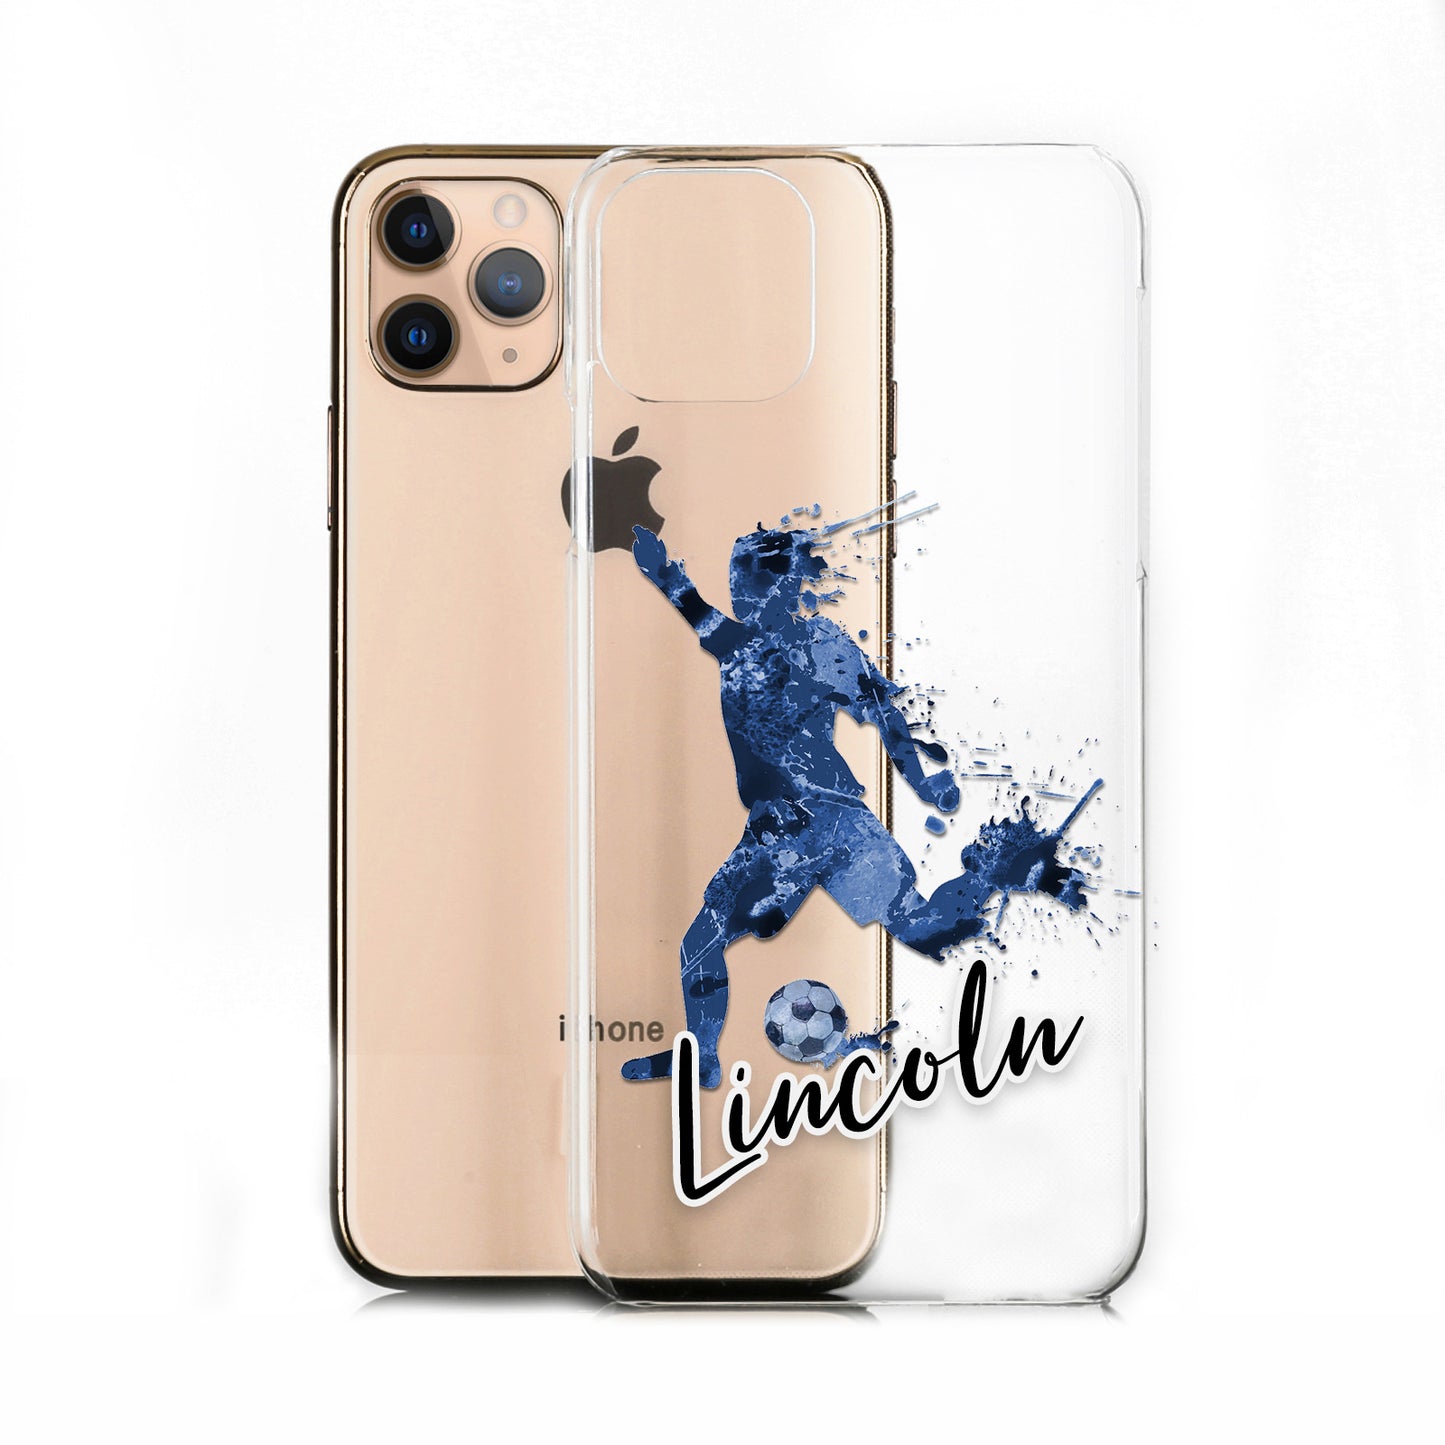 Personalised OnePlus Phone Hard Case - Vivid Blue Football Star with White Outlined Text